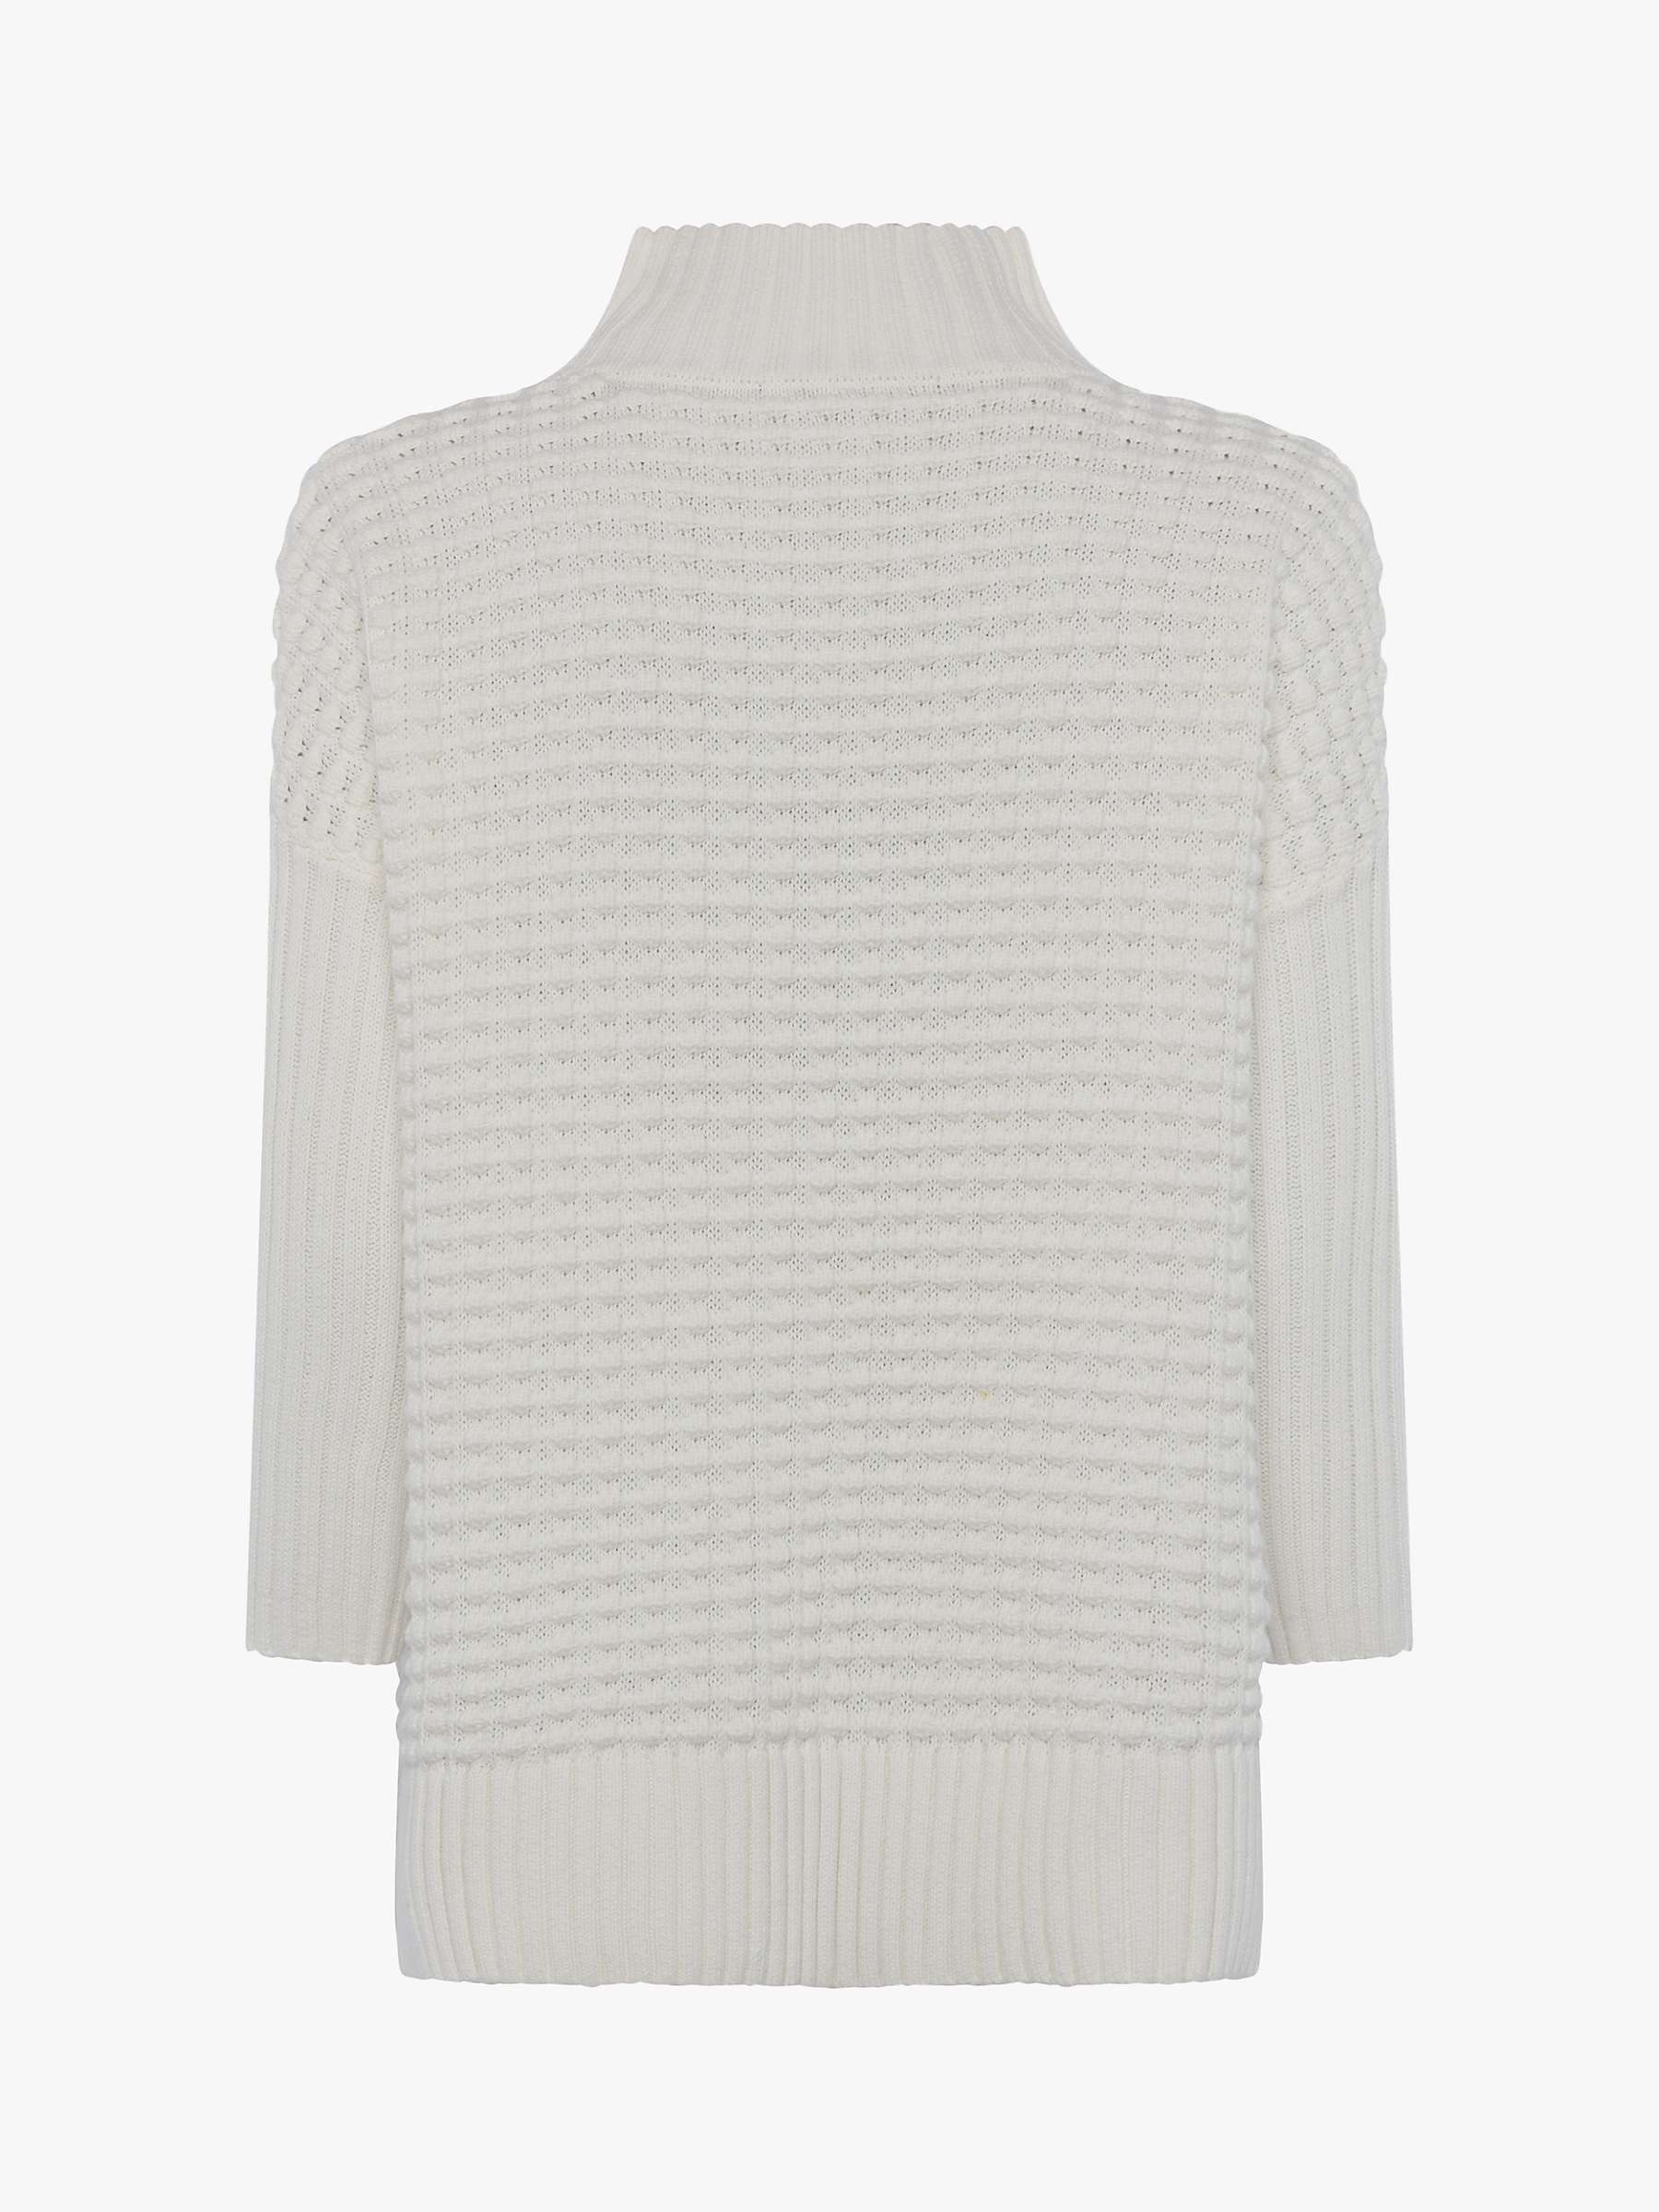 French Connection Mozart Turtle Neck Jumper, White at John Lewis & Partners